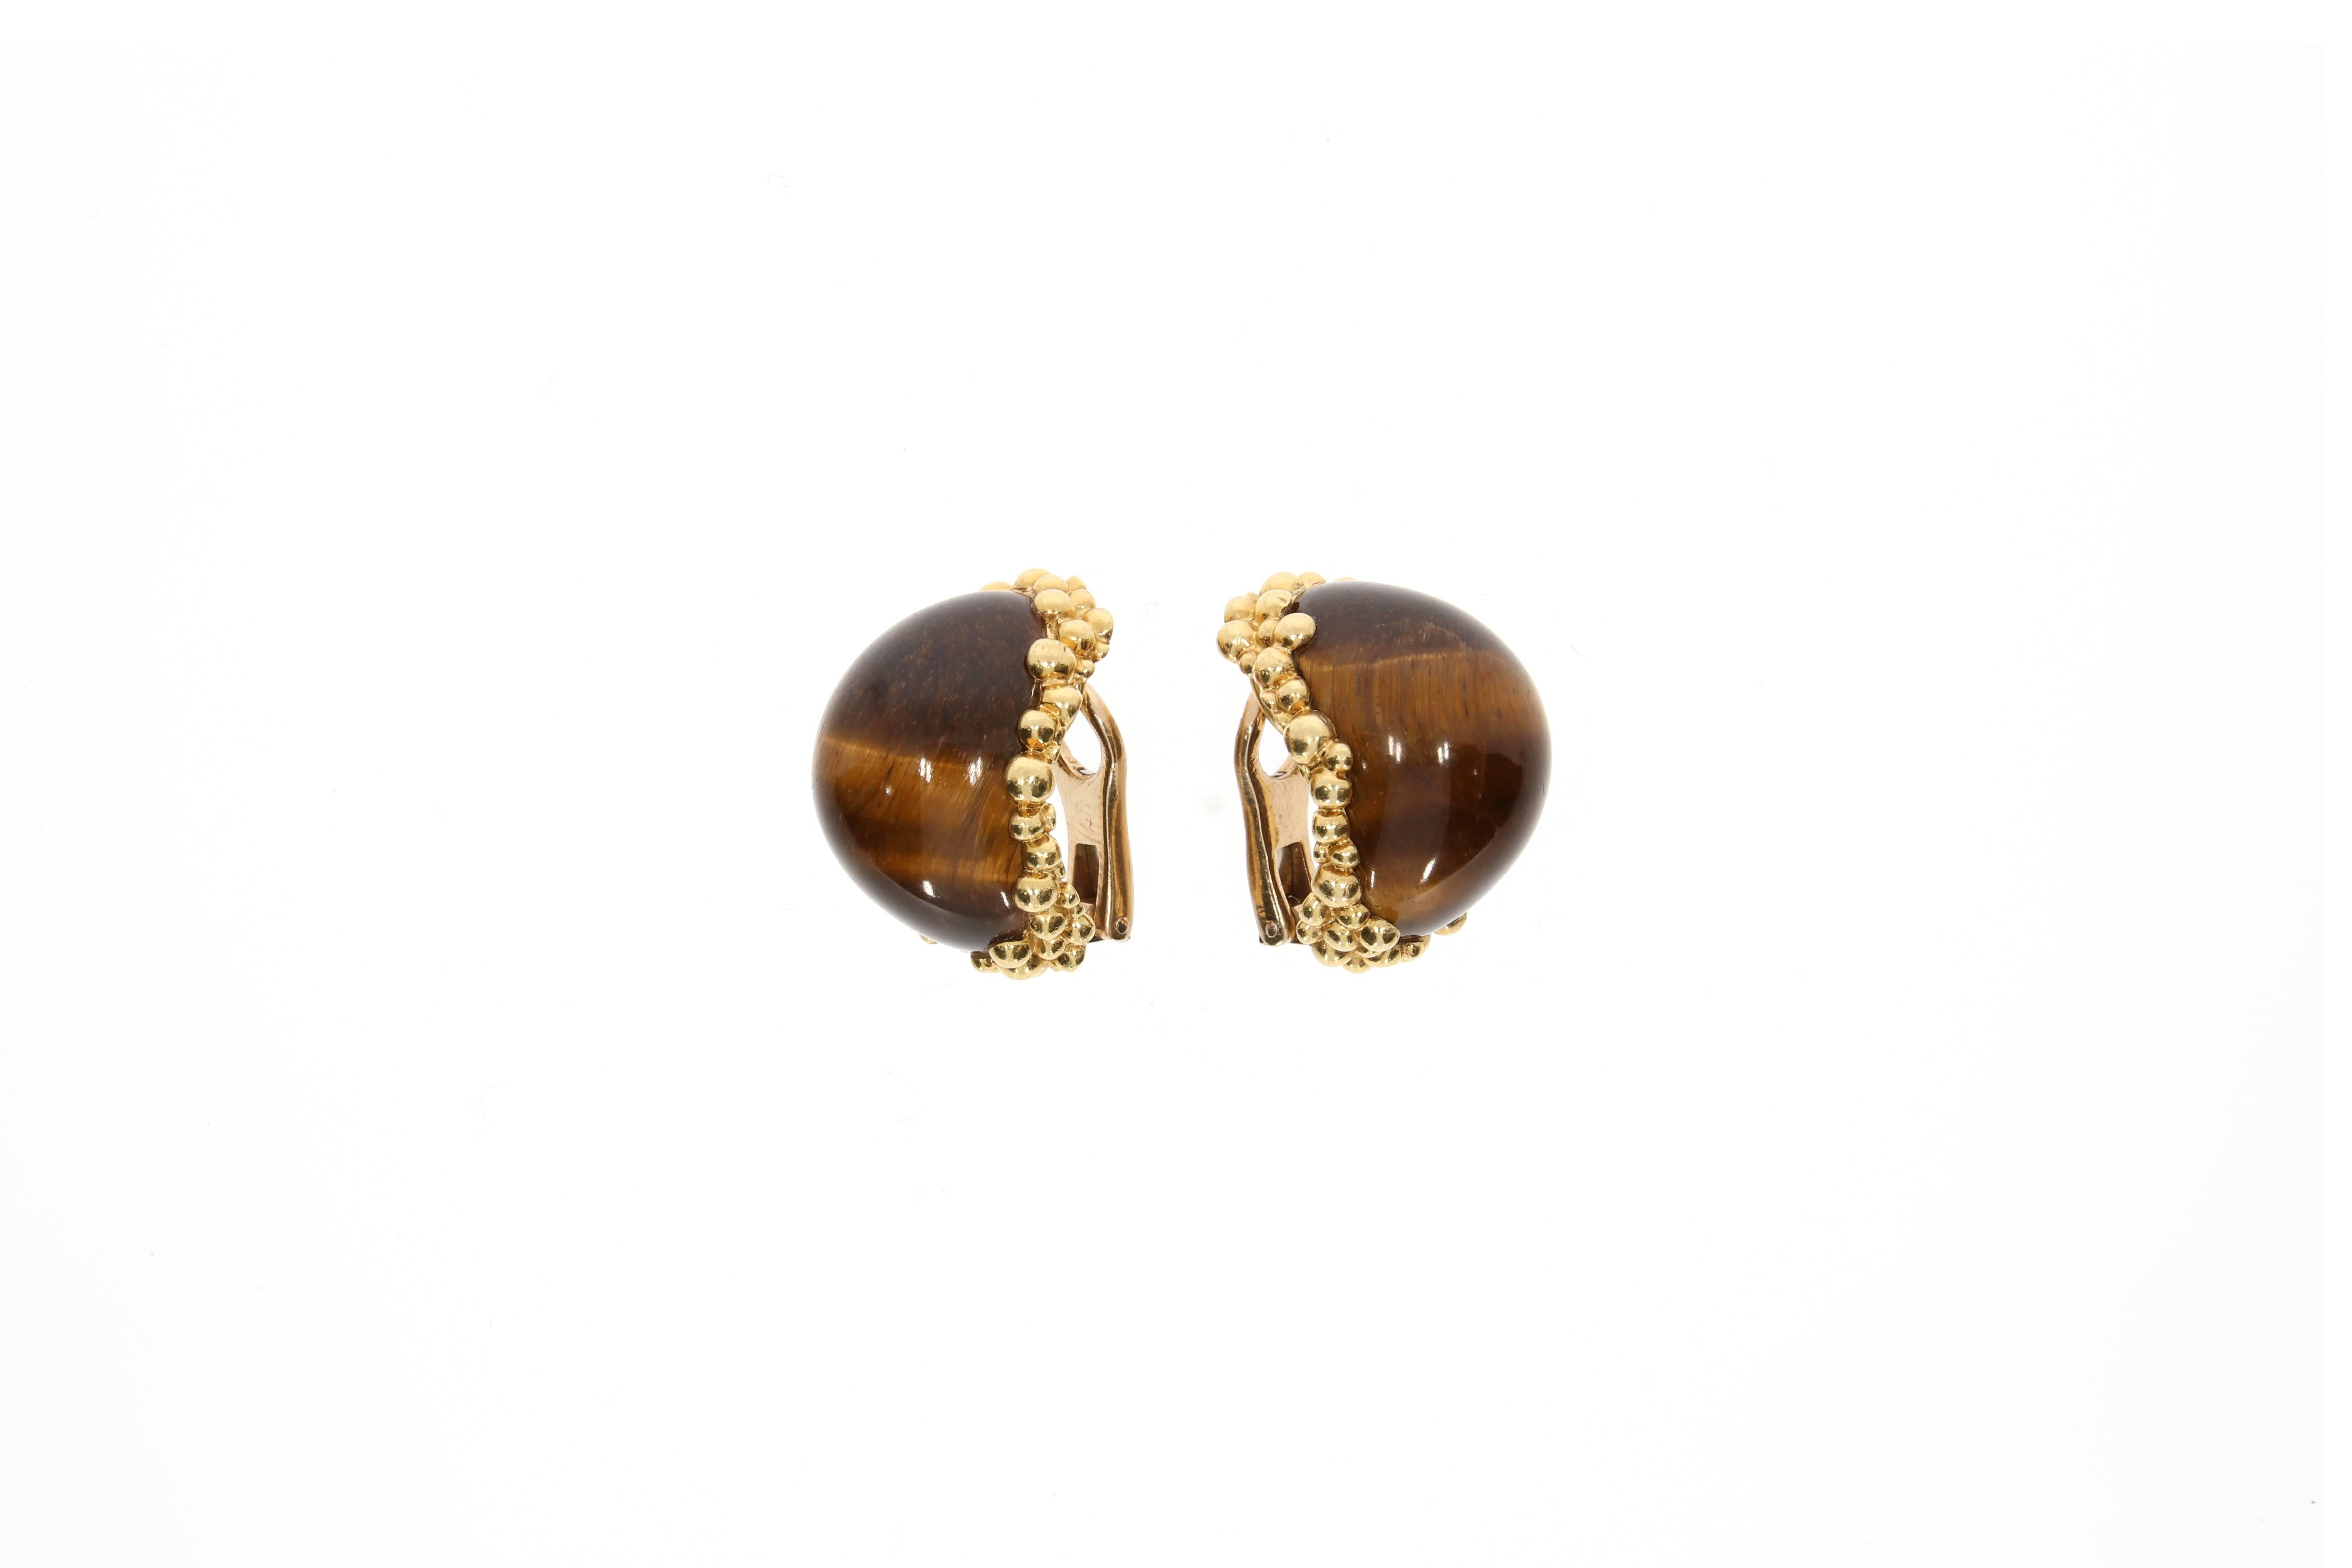 A pair of English 18 karat yellow gold and tiger´s eye ear clips, by Kutchinsky. Circa 1970´s. The cabochon- cut golden- brown shimmering stones are embedded in an 18 karat yellow gold refined and artistic setting. Signed 